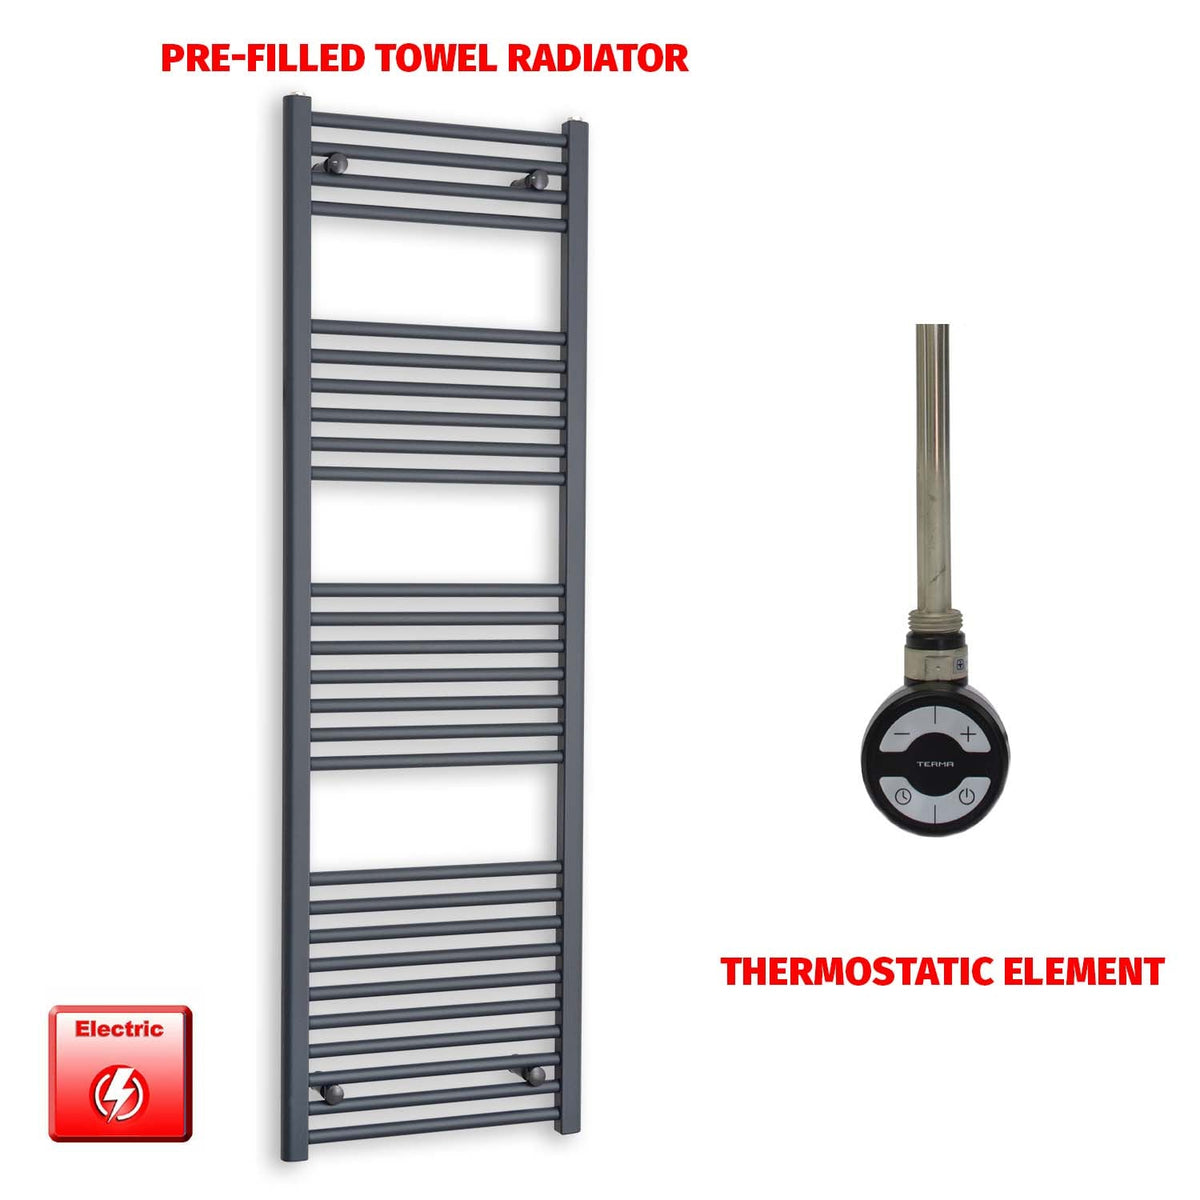 1600mm High 500mm Wide Flat Anthracite Pre-Filled Electric Heated Towel Rail Radiator HTR MOA Thermostatic element no timer